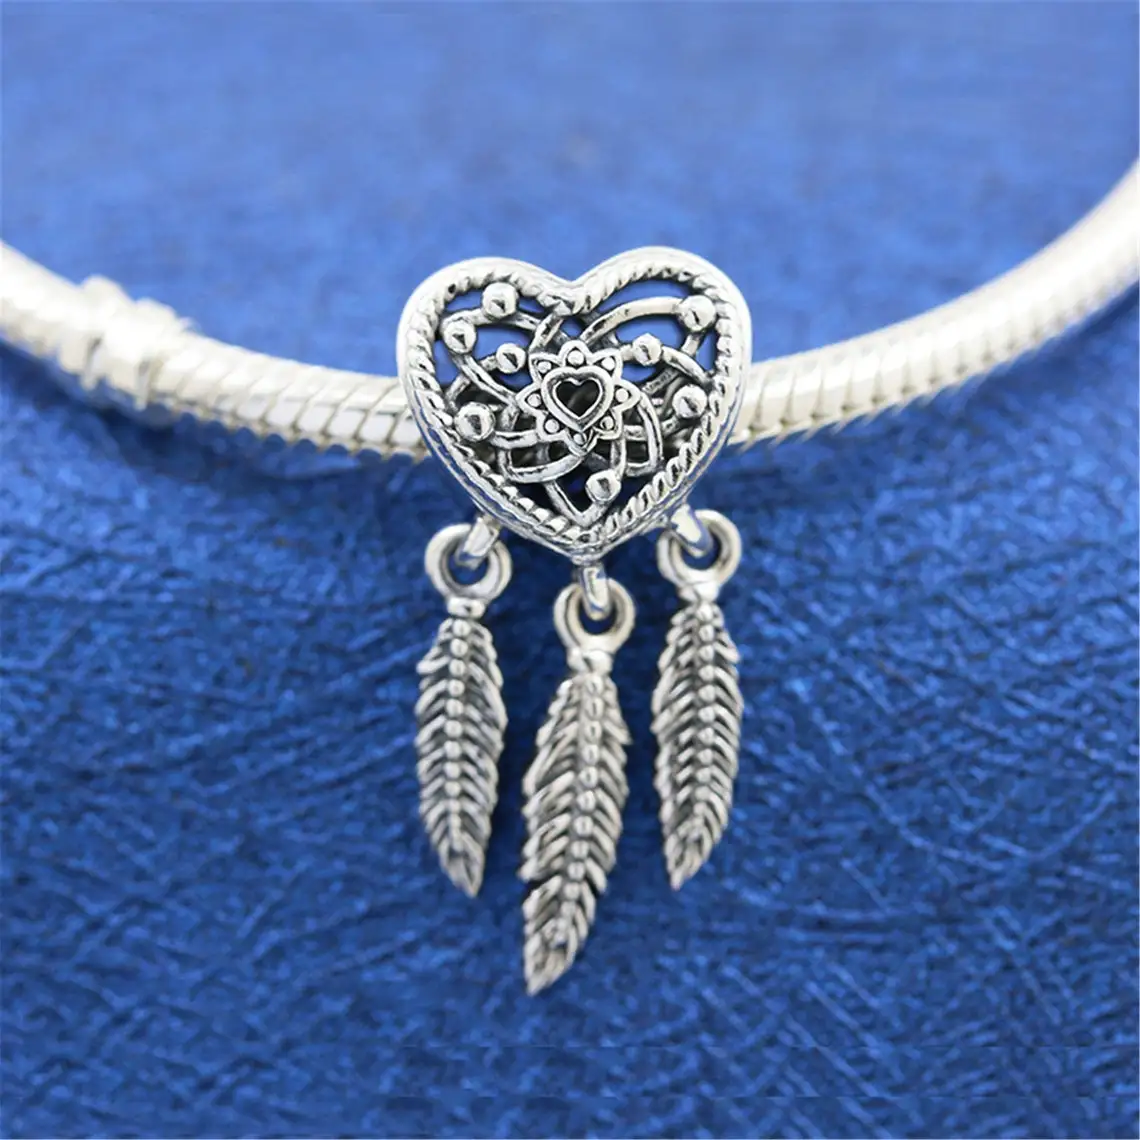 

925 Sterling Silver Openwork Heart & Three Feathers Dreamcatcher Dangle Charm Bead Fits All European Pandora Bracelets Necklaces